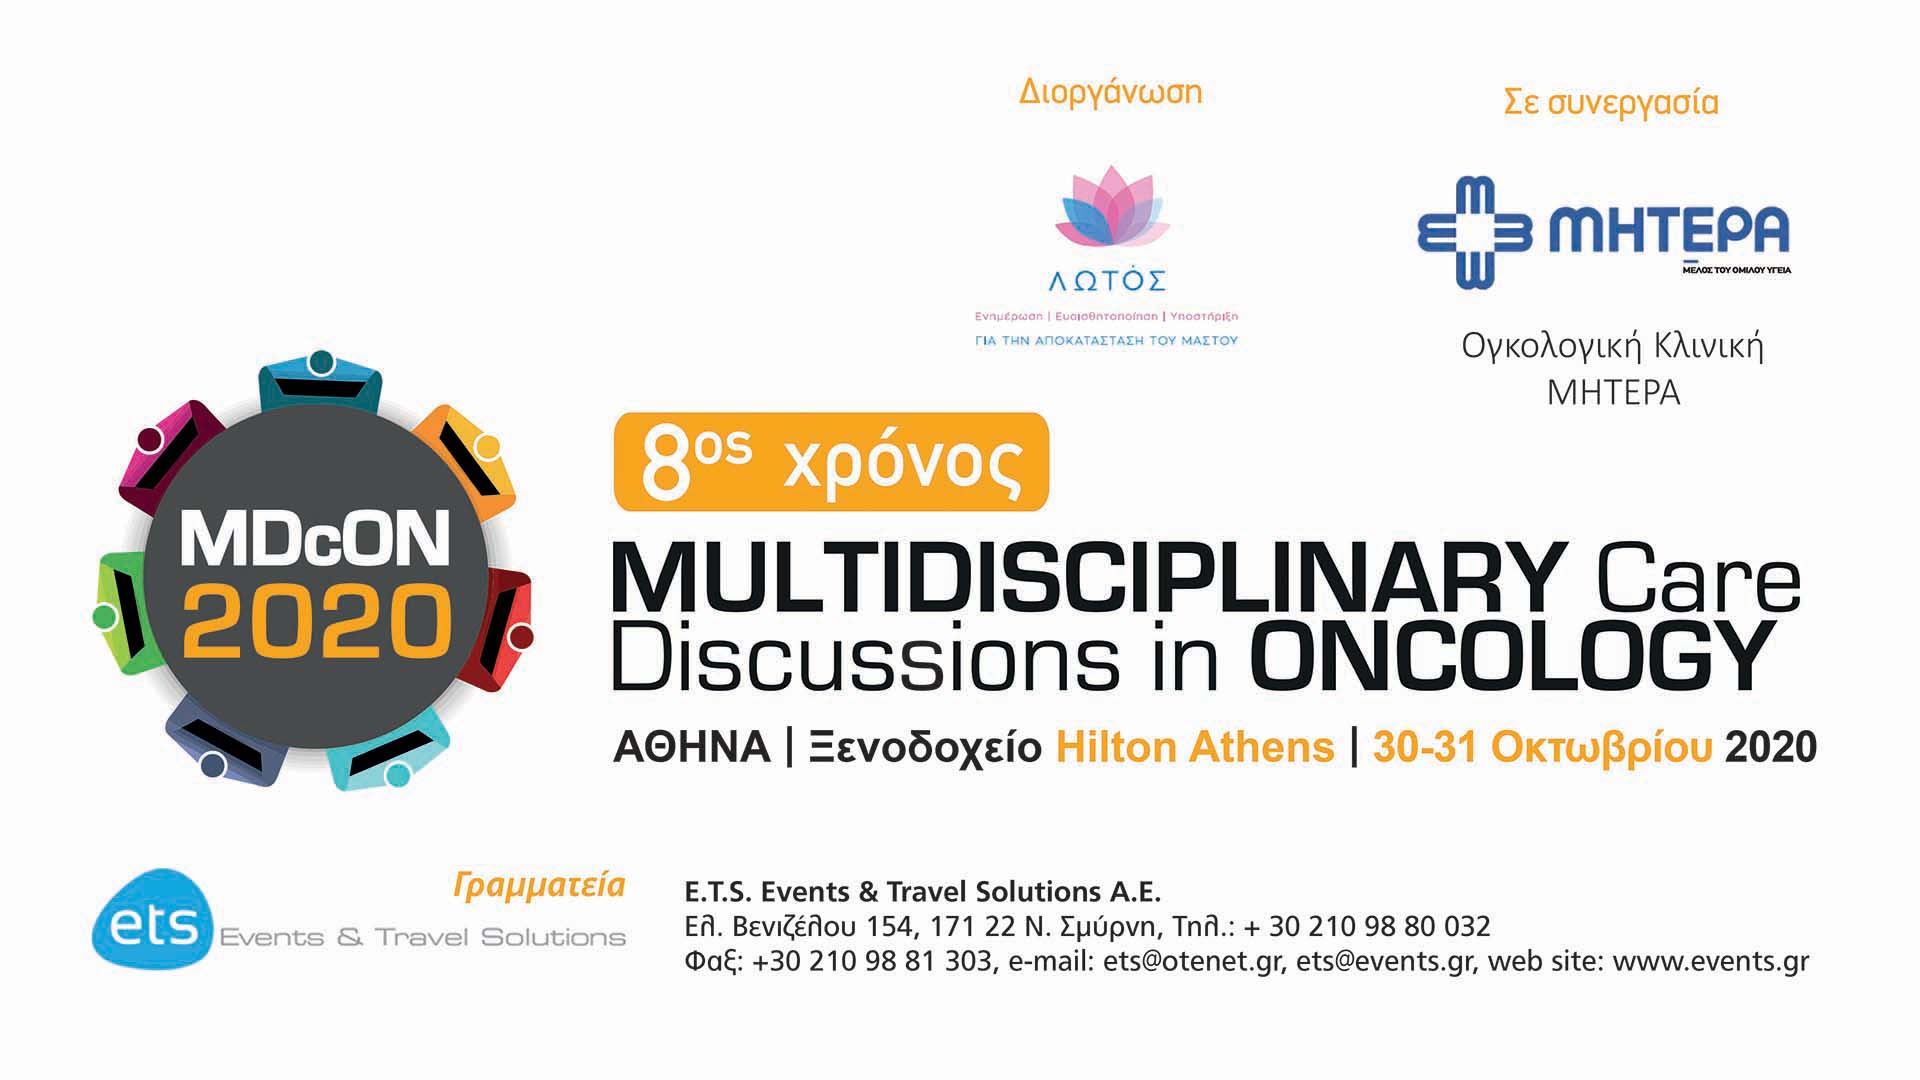 MDcON 2020 - Multidisciplinary Care Discussions in Oncology